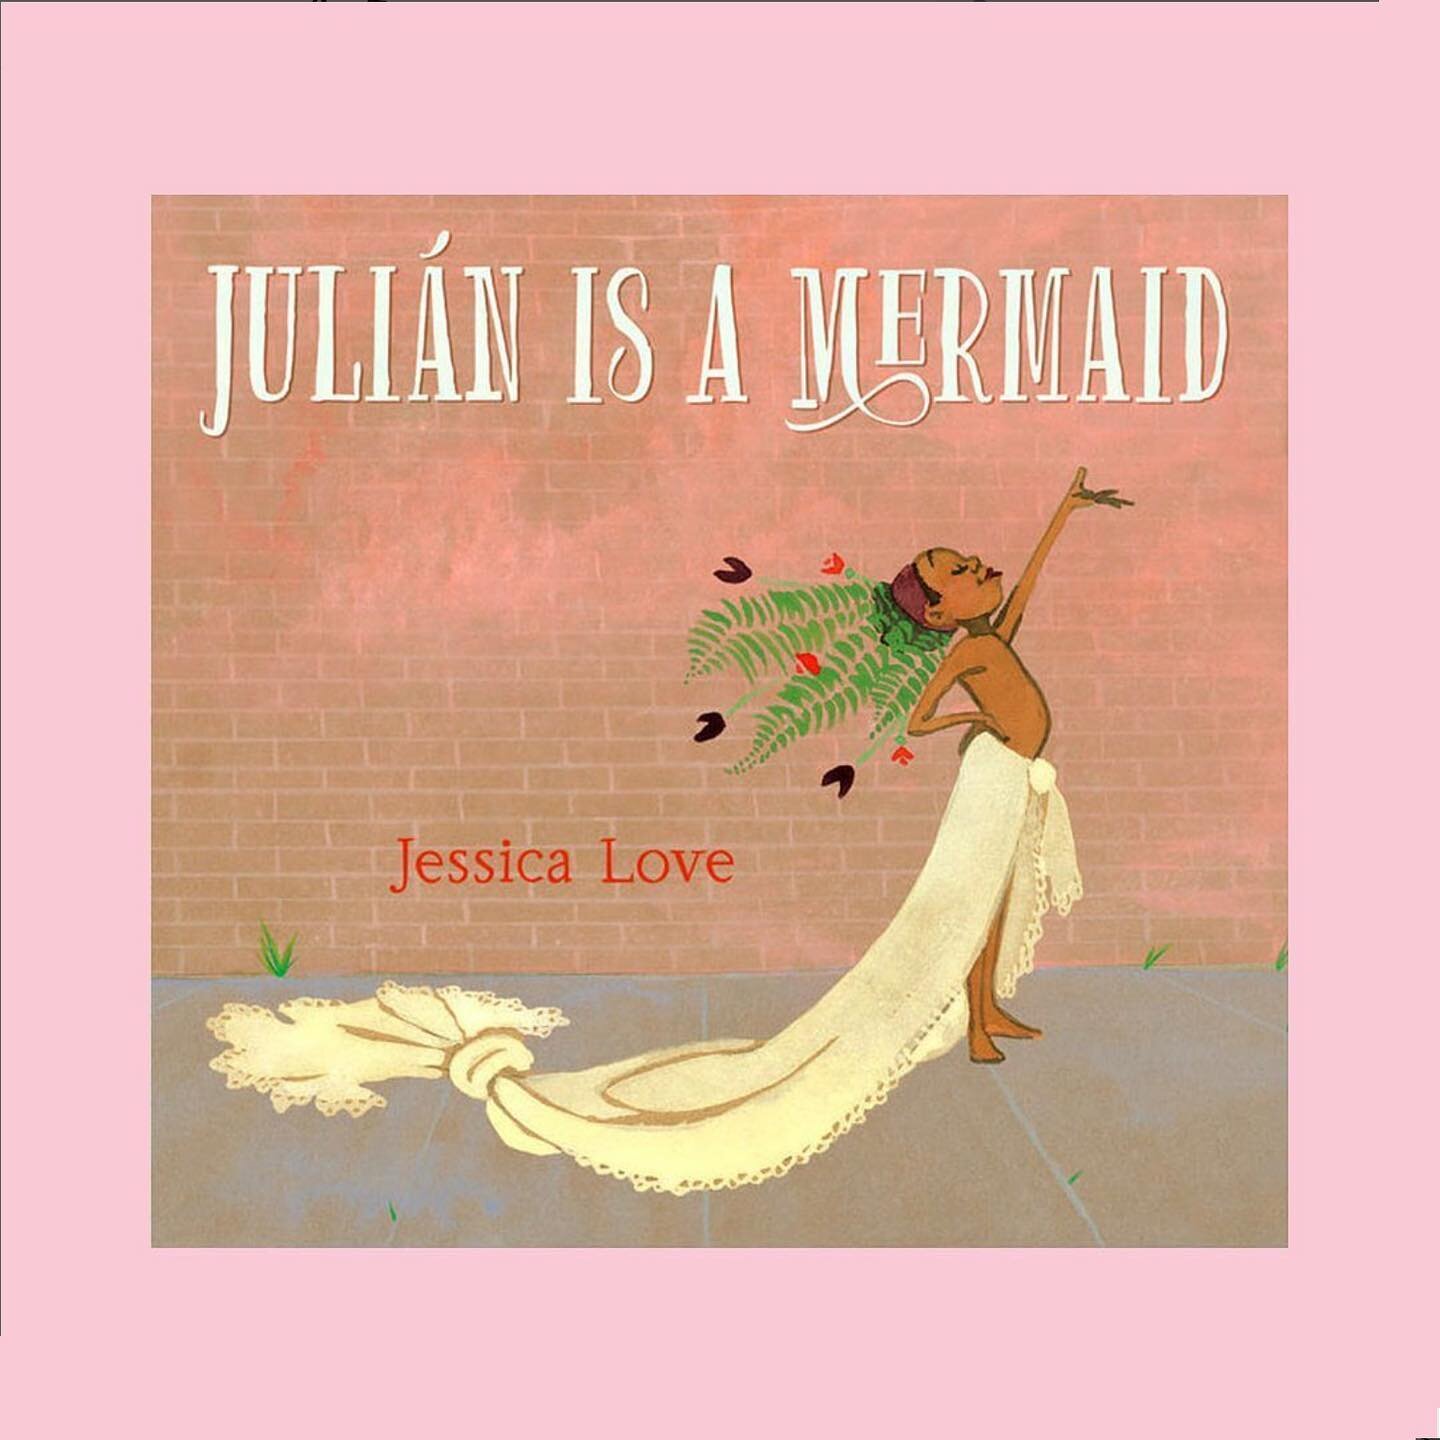 🧜&zwj;♀️ ❤️🧜&zwj;♀️ 💜🧜&zwj;♀️ 💛
To celebrate the 40th anniversary of the Mermaid Parade we are sharing one of our favorite picture books, &lsquo;Juli&aacute;n Is a Mermaid&rsquo; by Jessica Love&nbsp;@jesslovedraws.
 .
#findingstuffclub&nbsp;#me